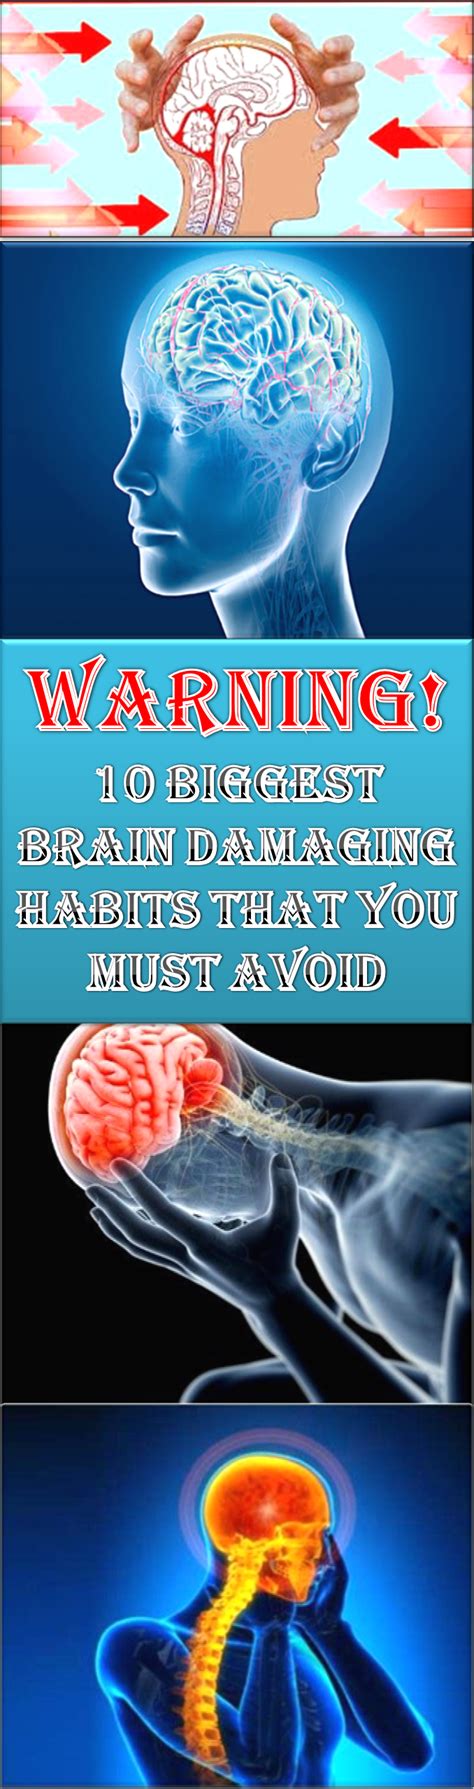 10 Biggest Brain Damaging Habits That You Must Avoid | Waist training workout, Essential yoga ...